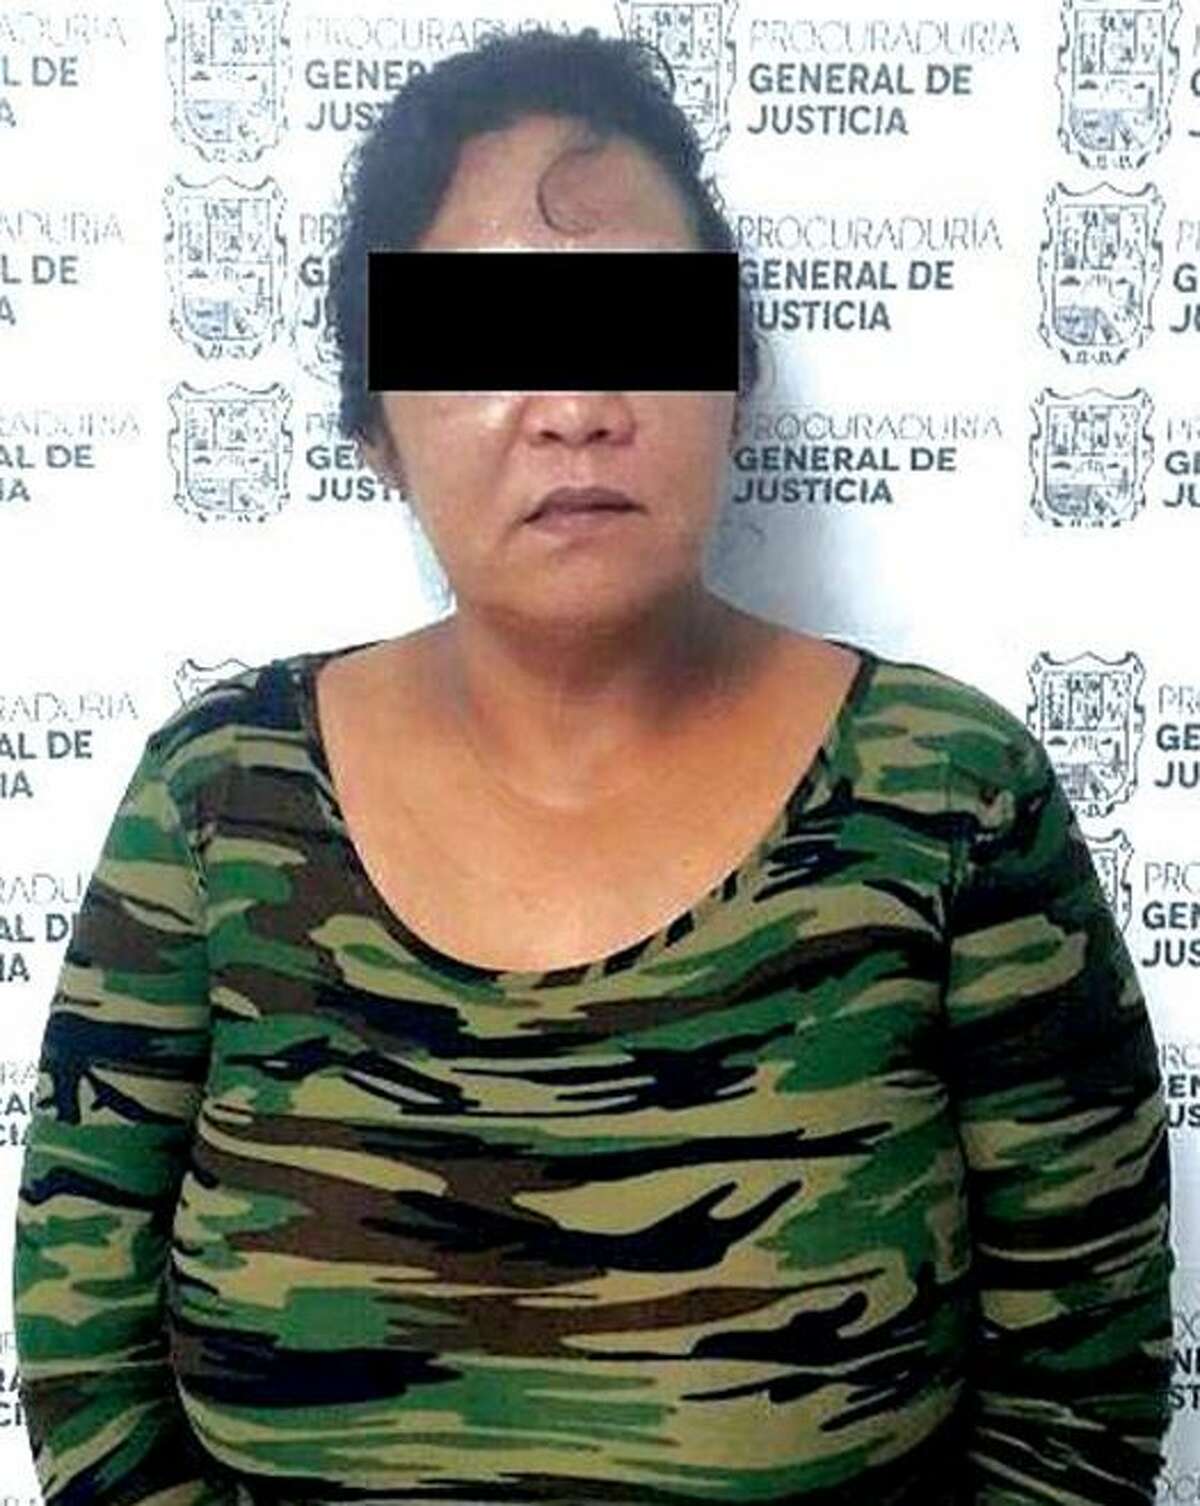 Tamaulipas state authorities said they arrested Ana Isabel Treviño on Monday night in connection with a kidnapping case that allegedly occurred in November 2016.